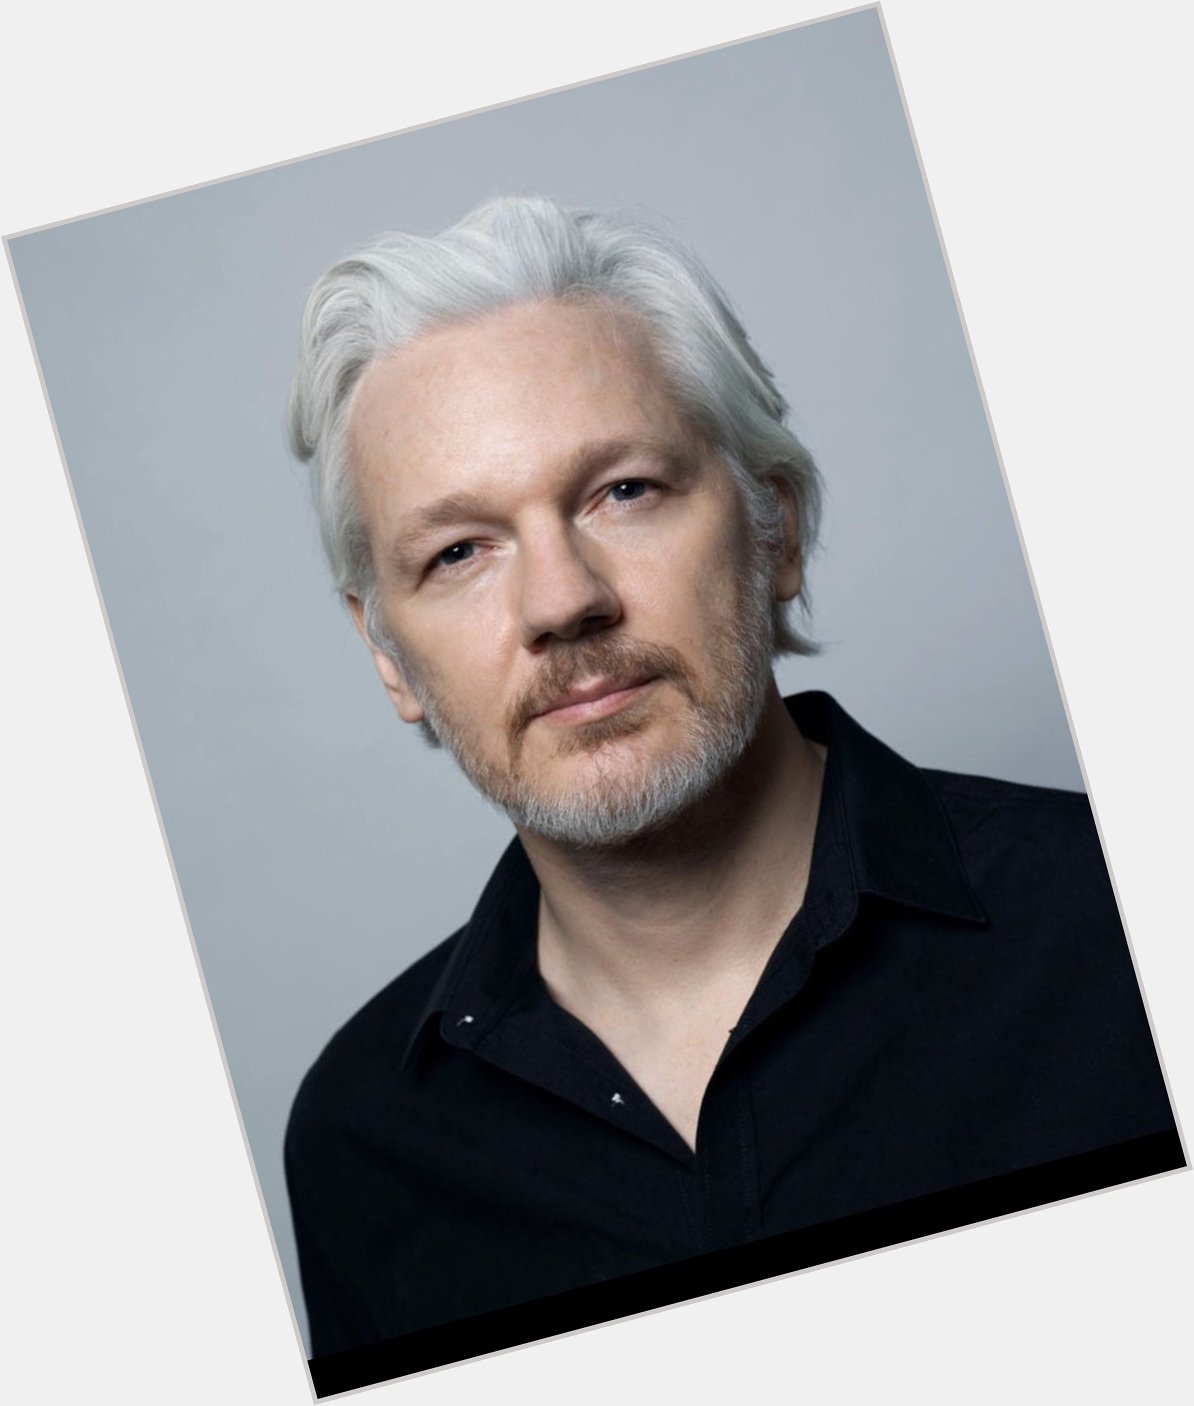 Happy Birthday Julian Assange!
Thank you for helping to expose truth! 